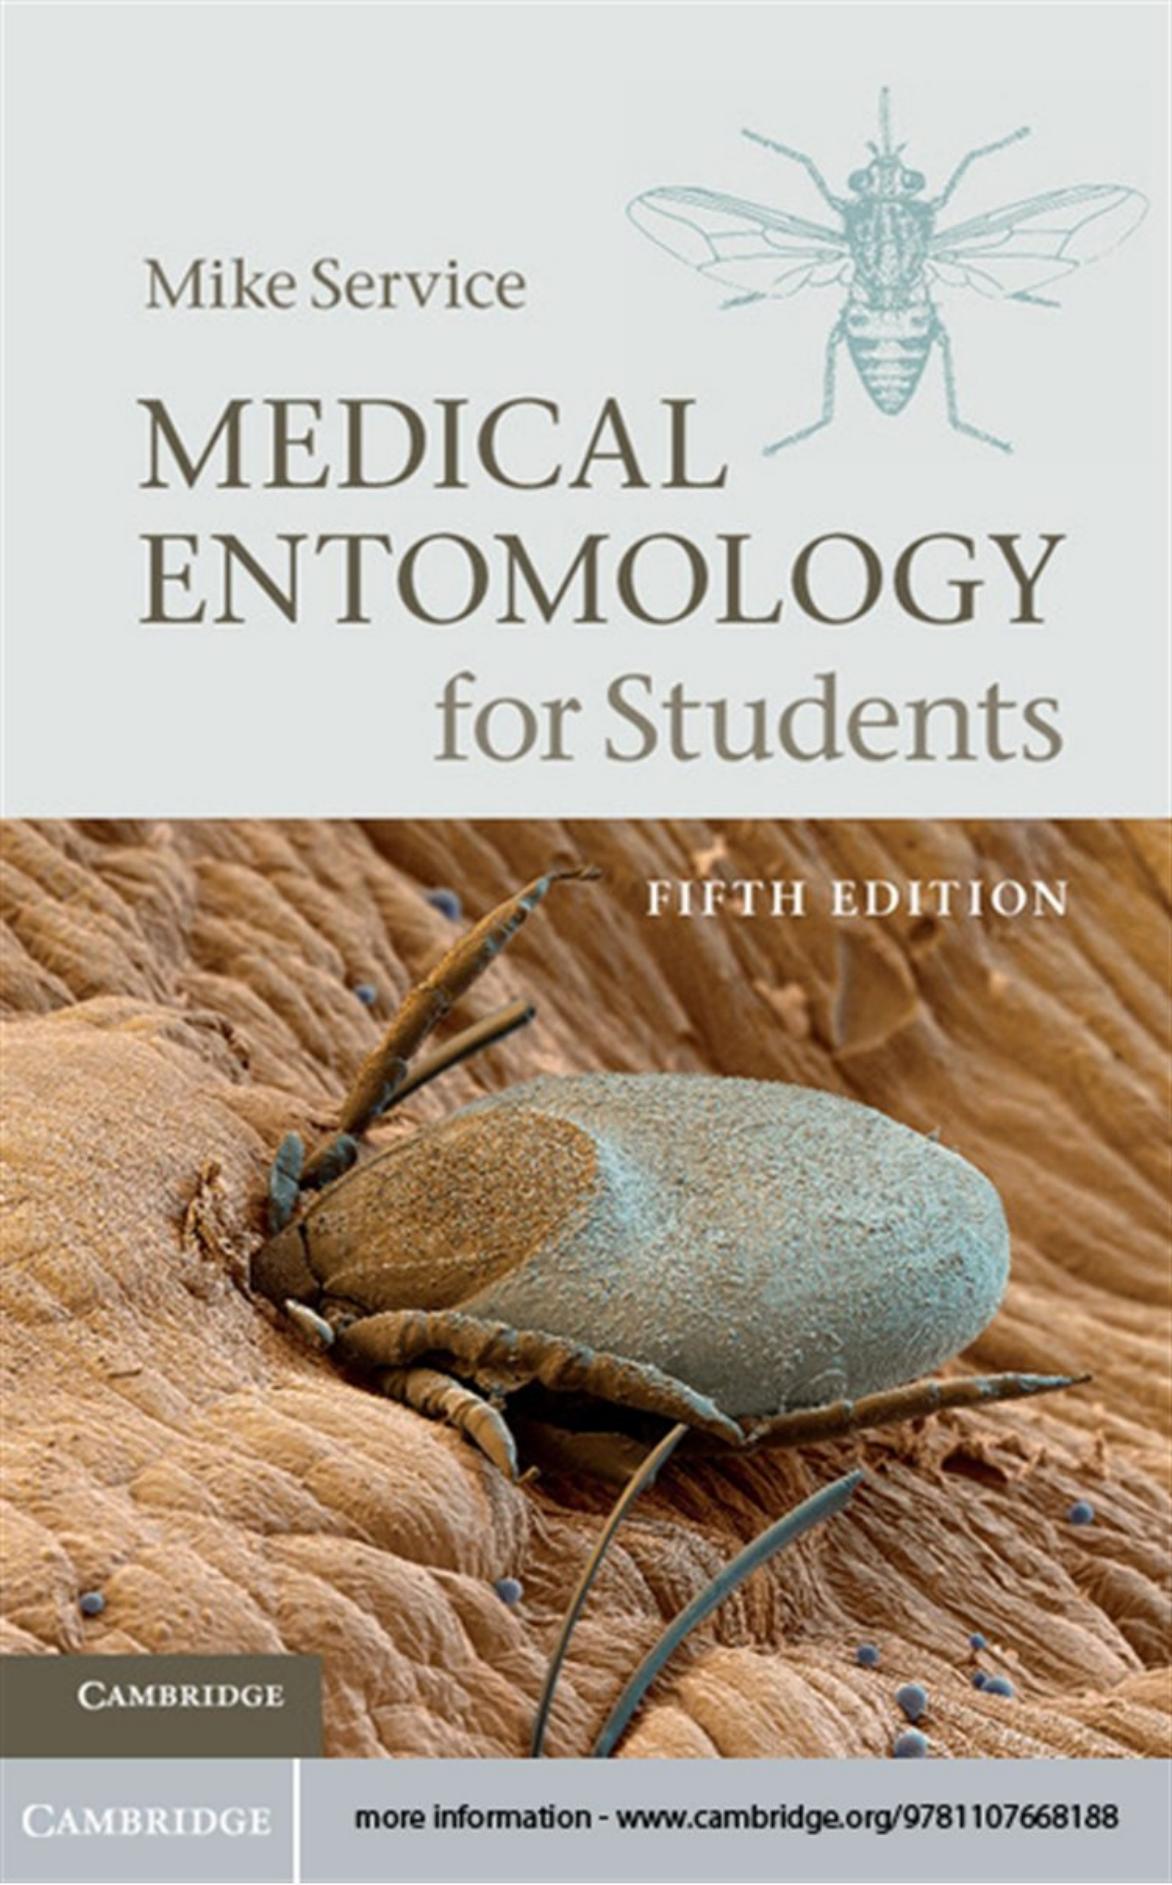 Mike Service Medical Entomology for students 2012